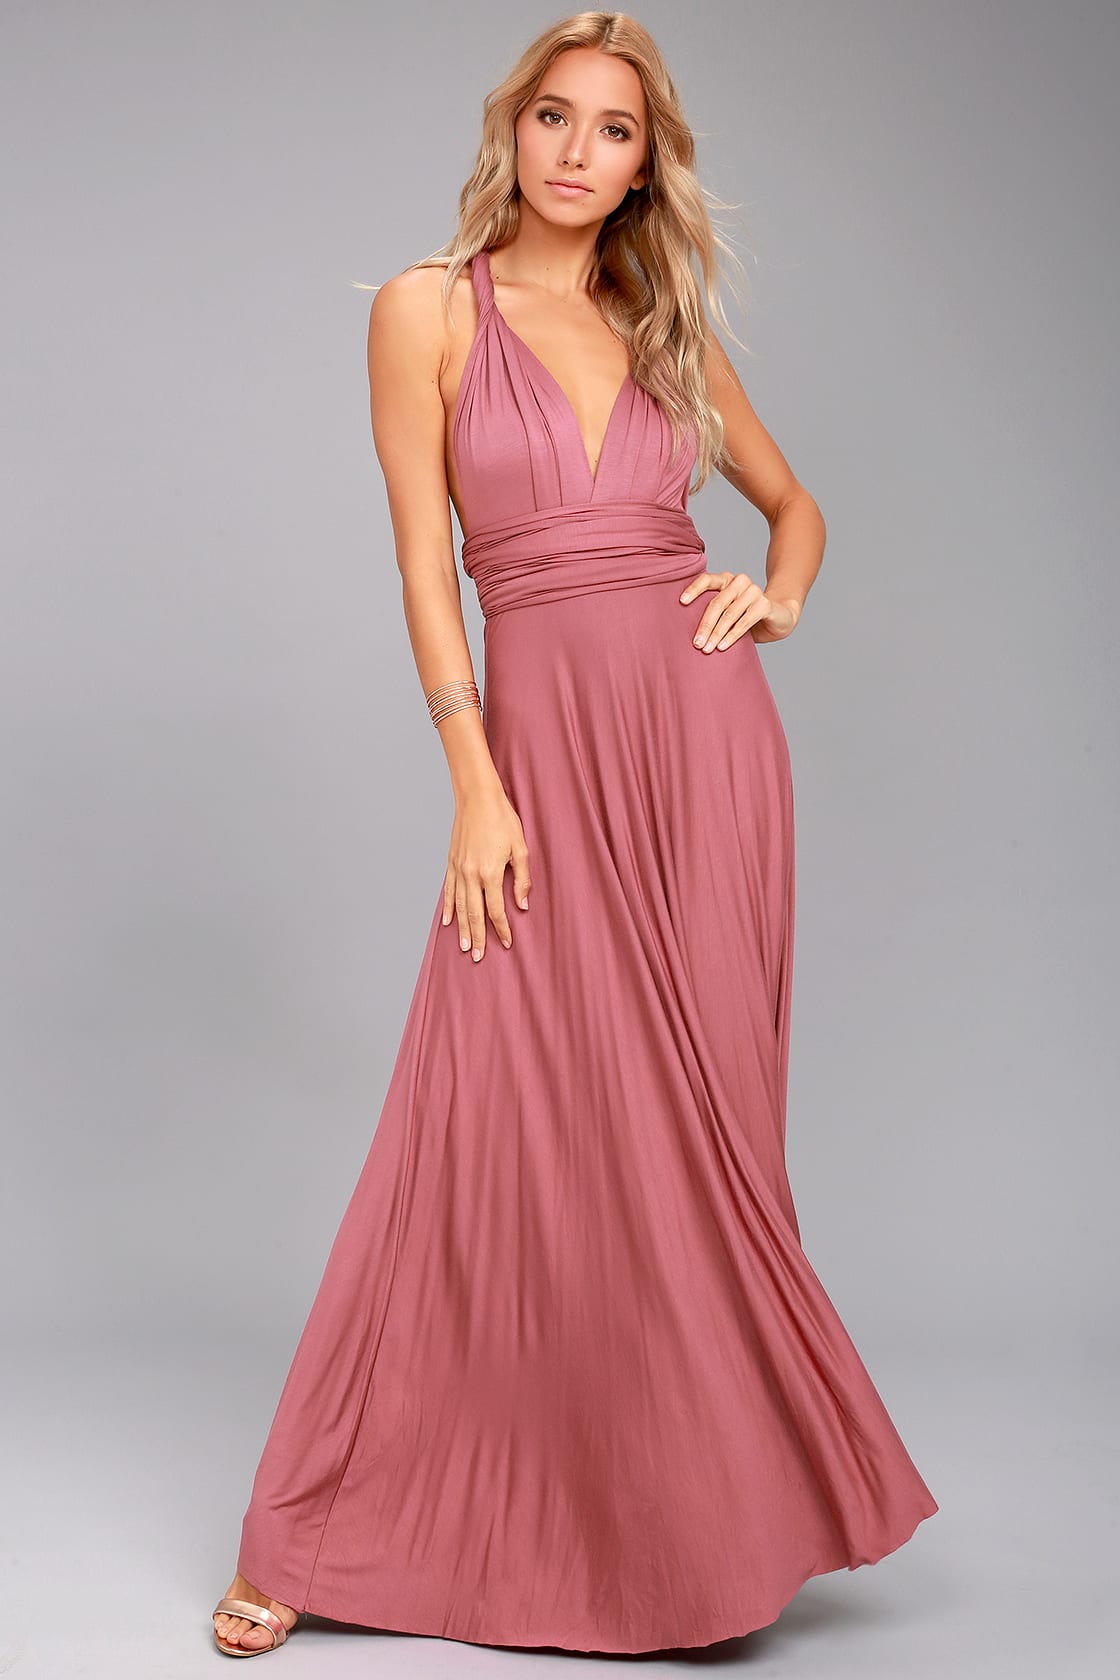 Infinity Bridesmaid Dress Under $100 in Rose Pink